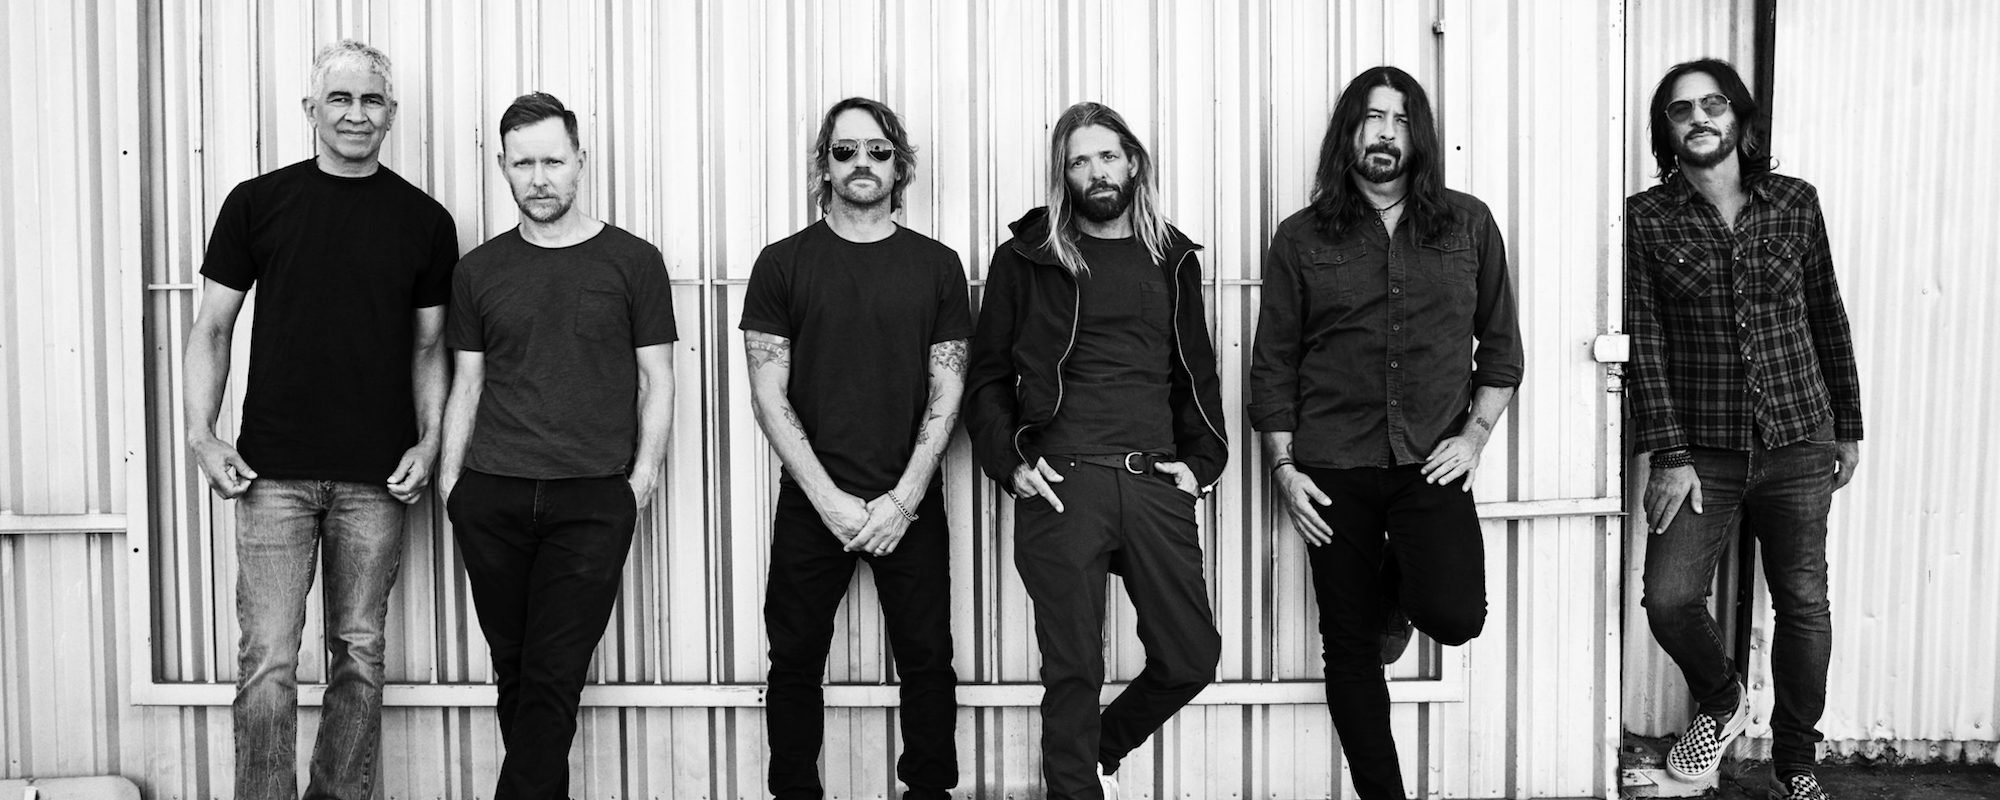 The Meaning Behind the Band Name: Foo Fighters